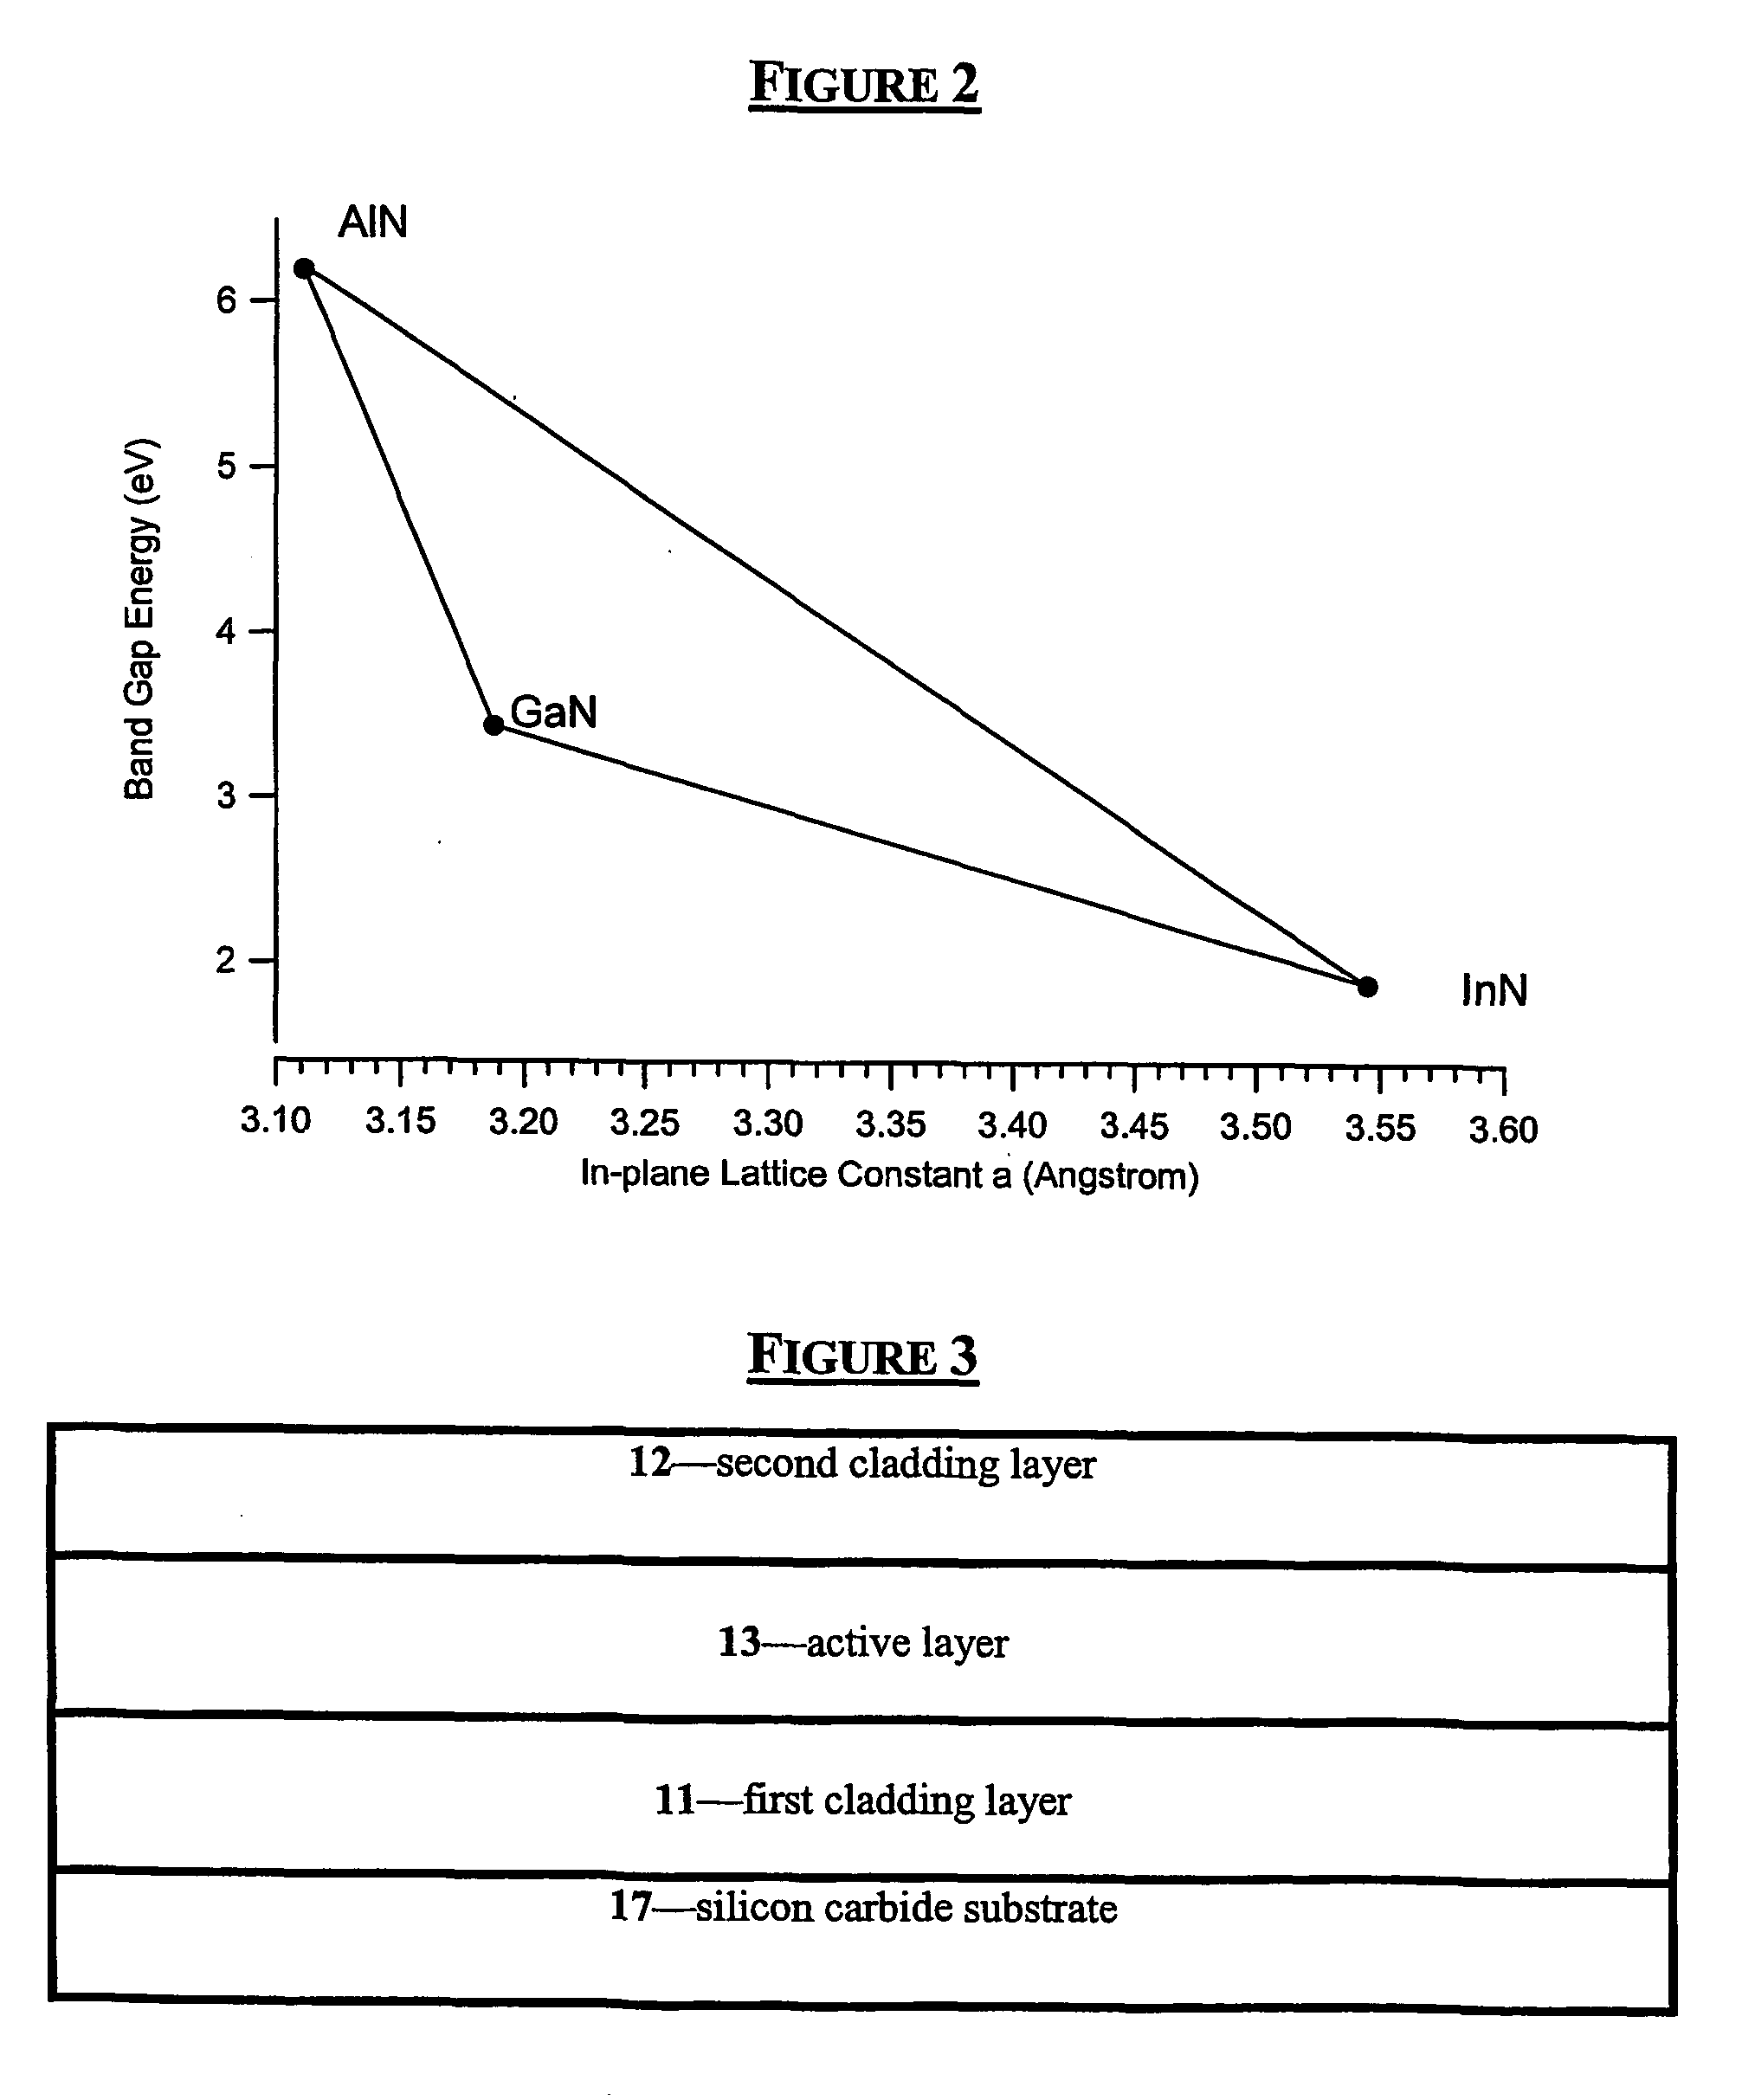 Group lll nitride emitting devices with gallium-free layers